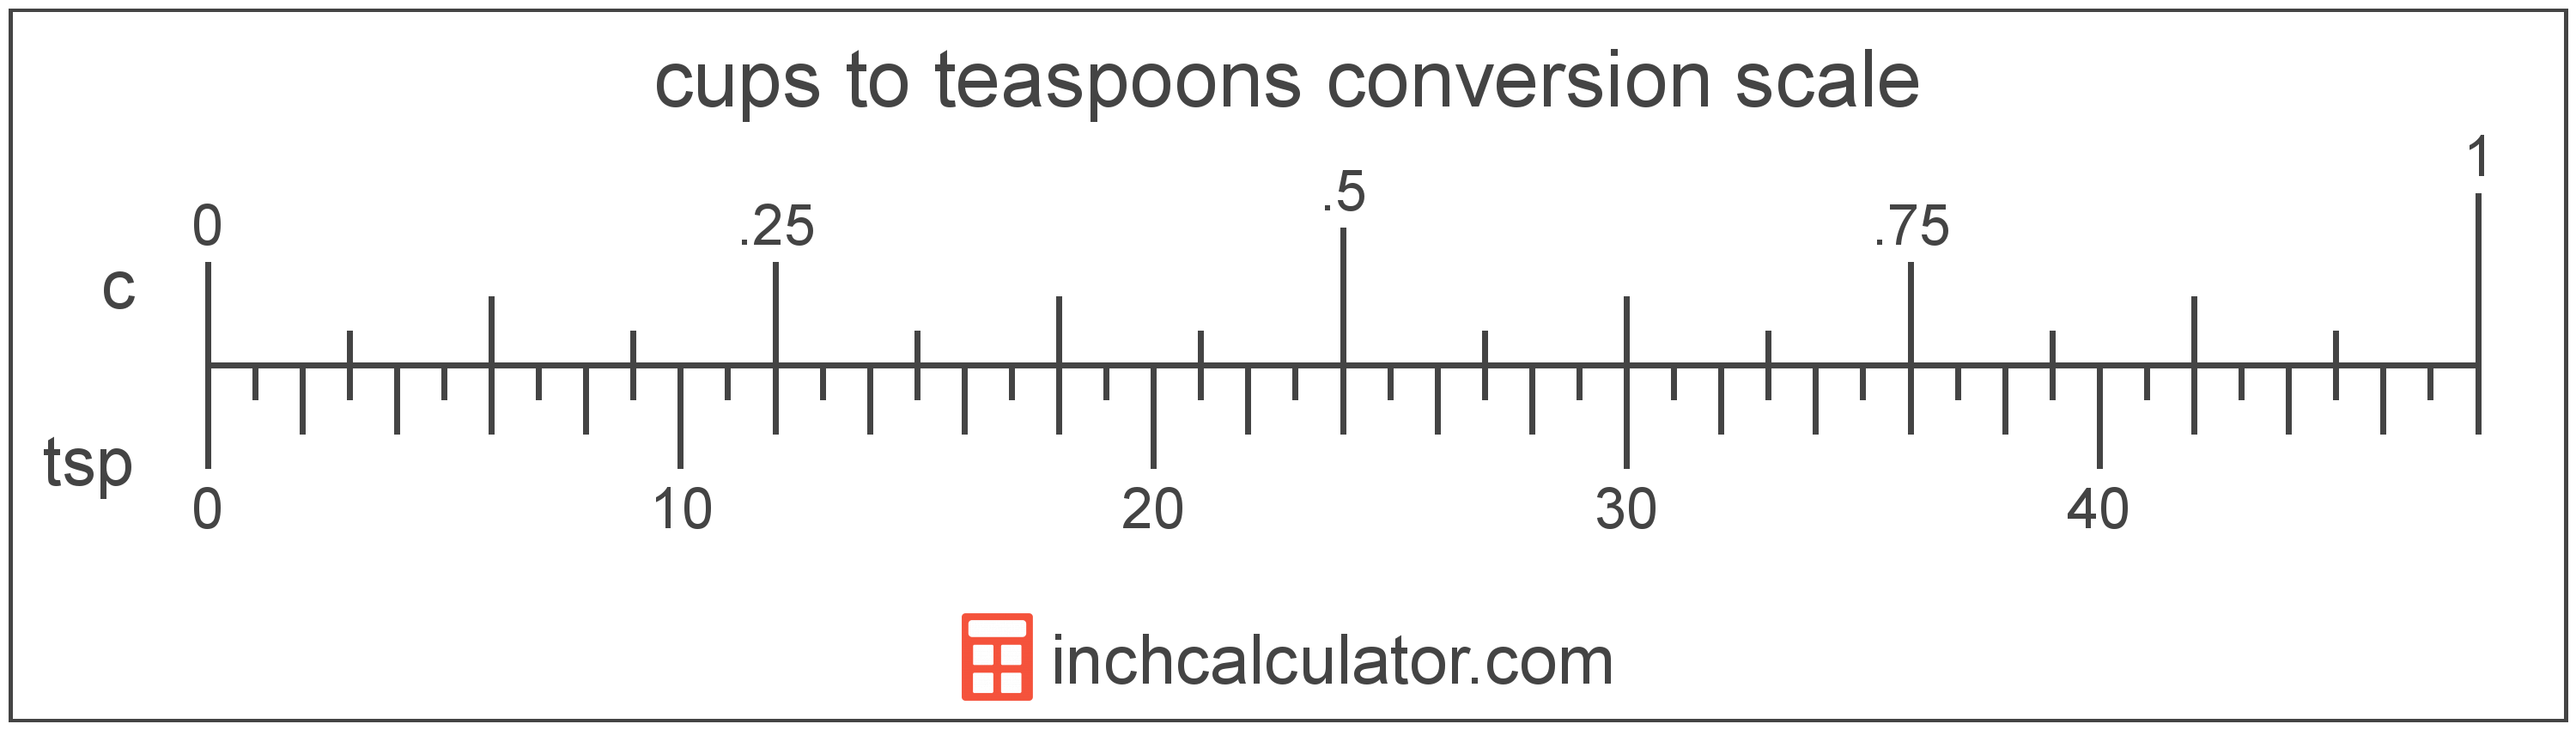 conversion scale showing cups and equivalent teaspoons volume values